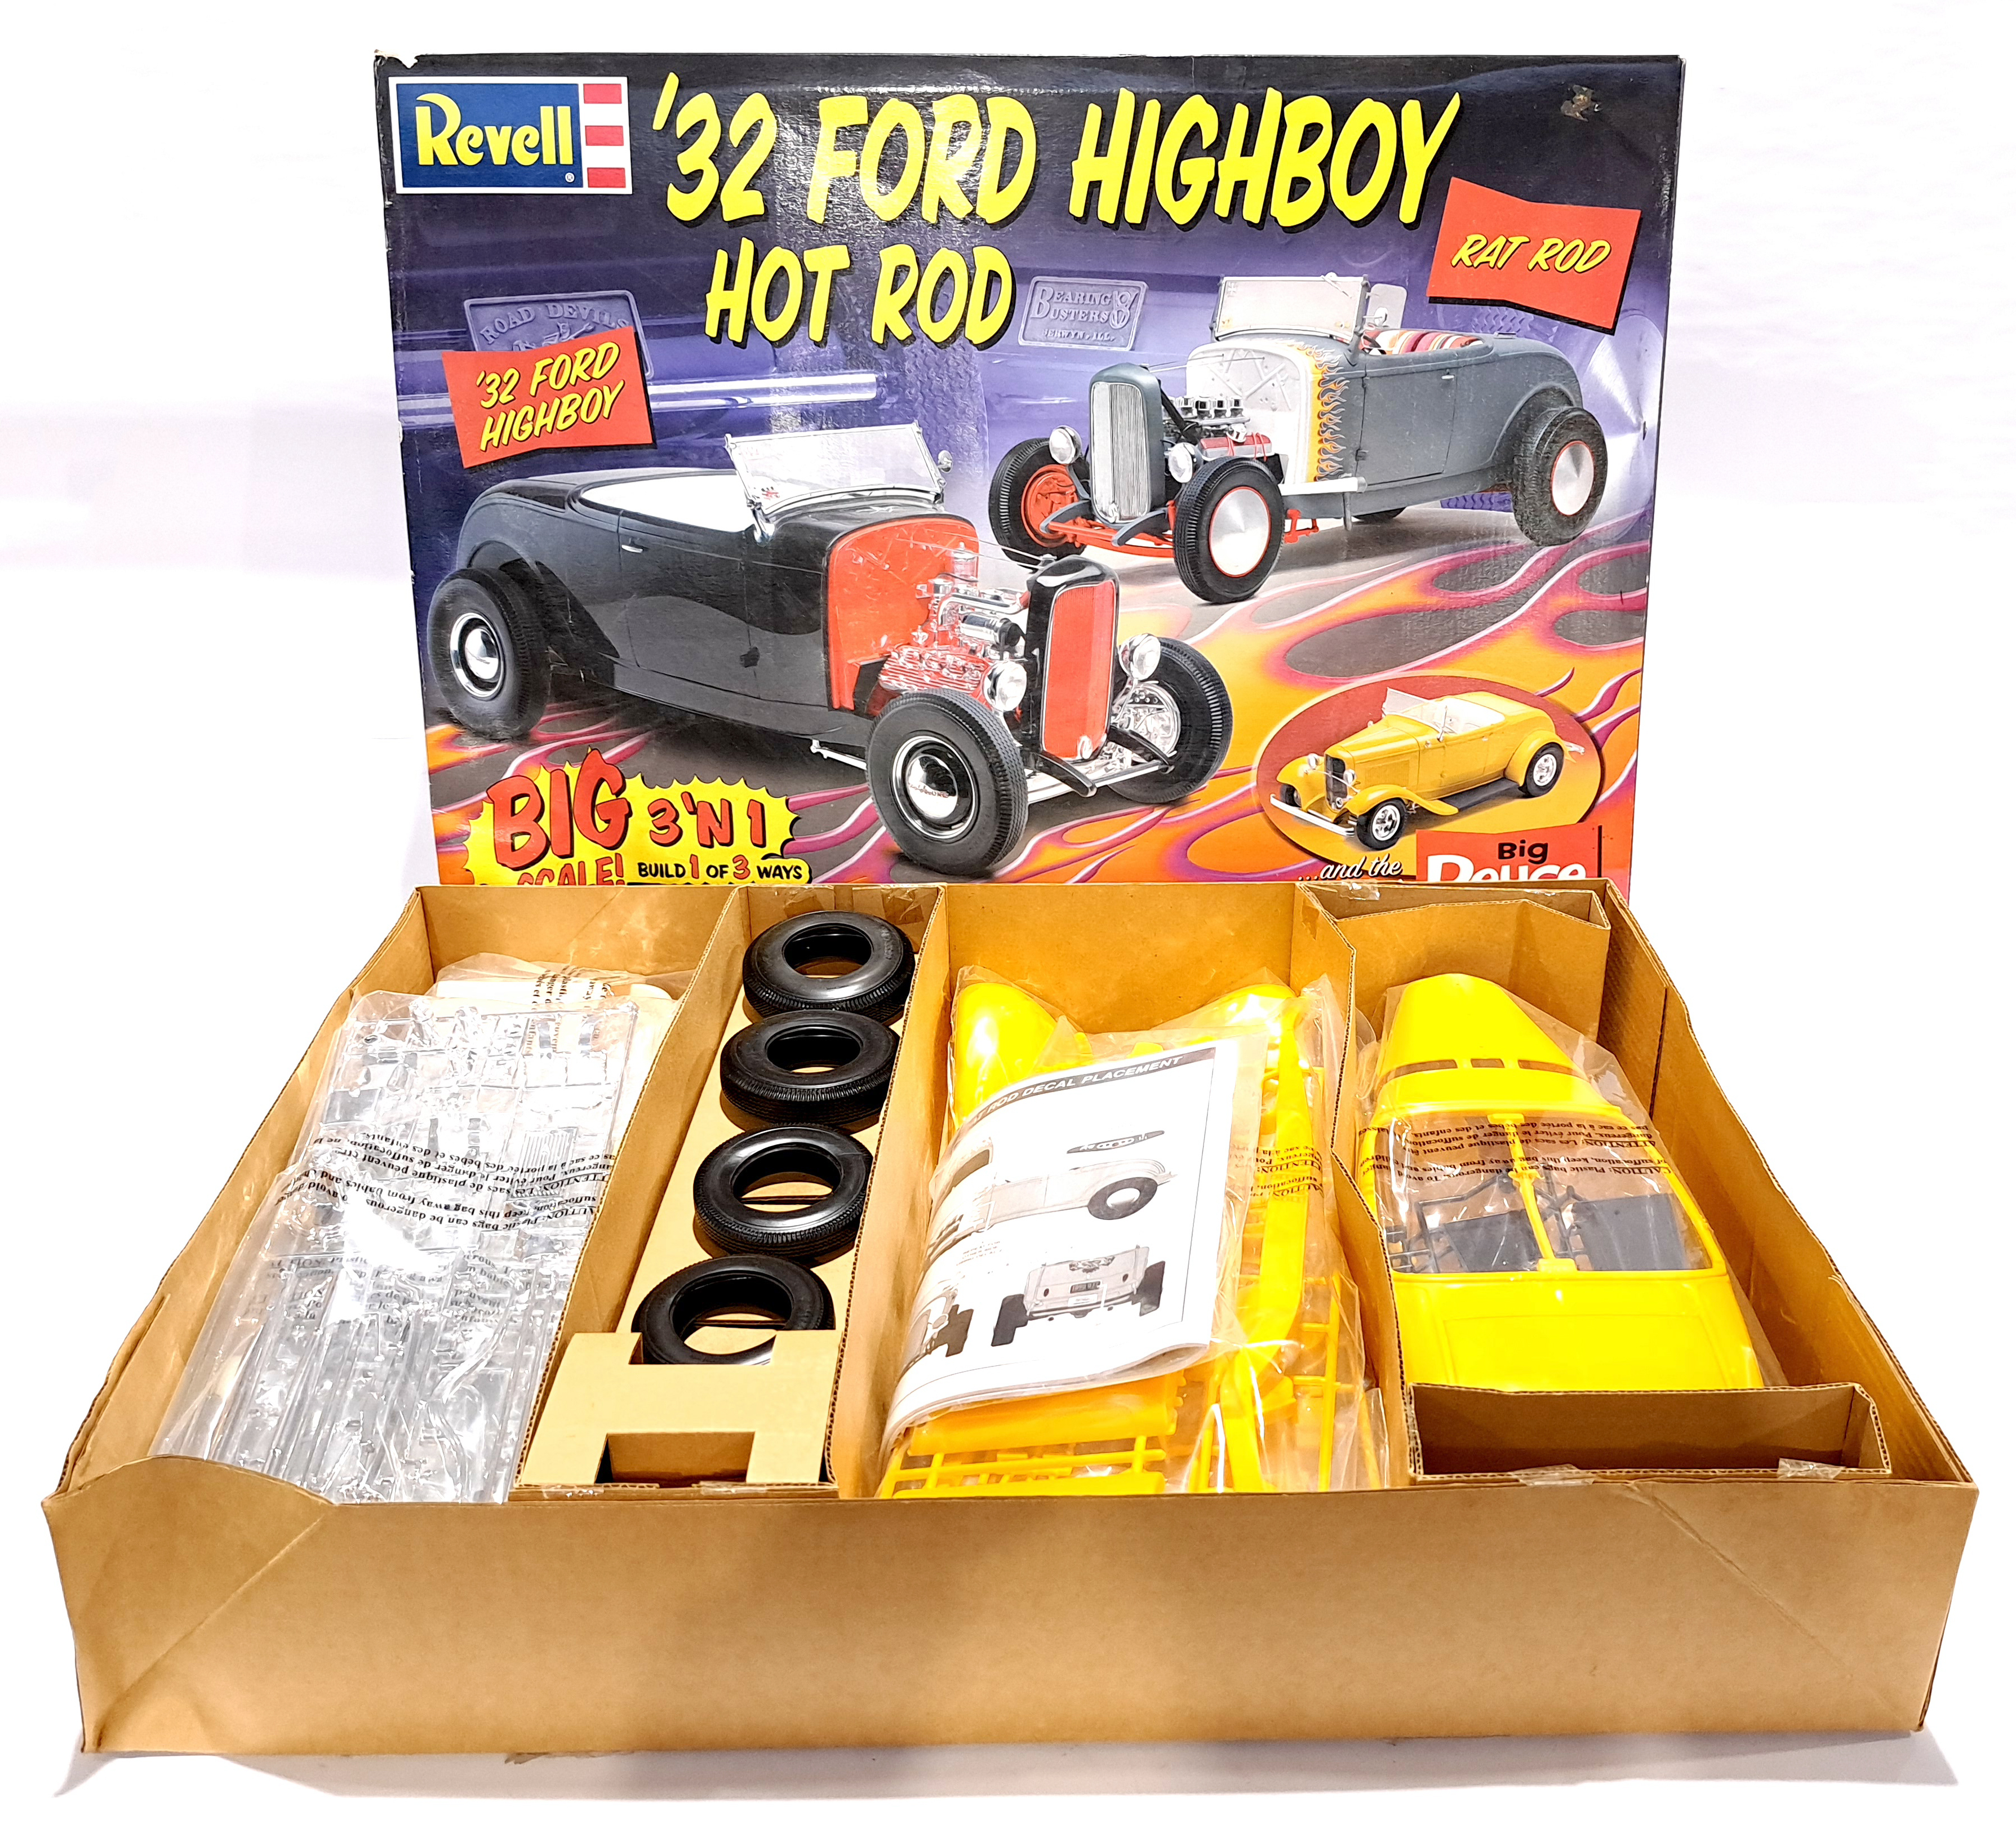 Revell 85-2616 '32 Ford Highboy Hot Rod 3 'N 1 1:8 scale unmade plastic model kit